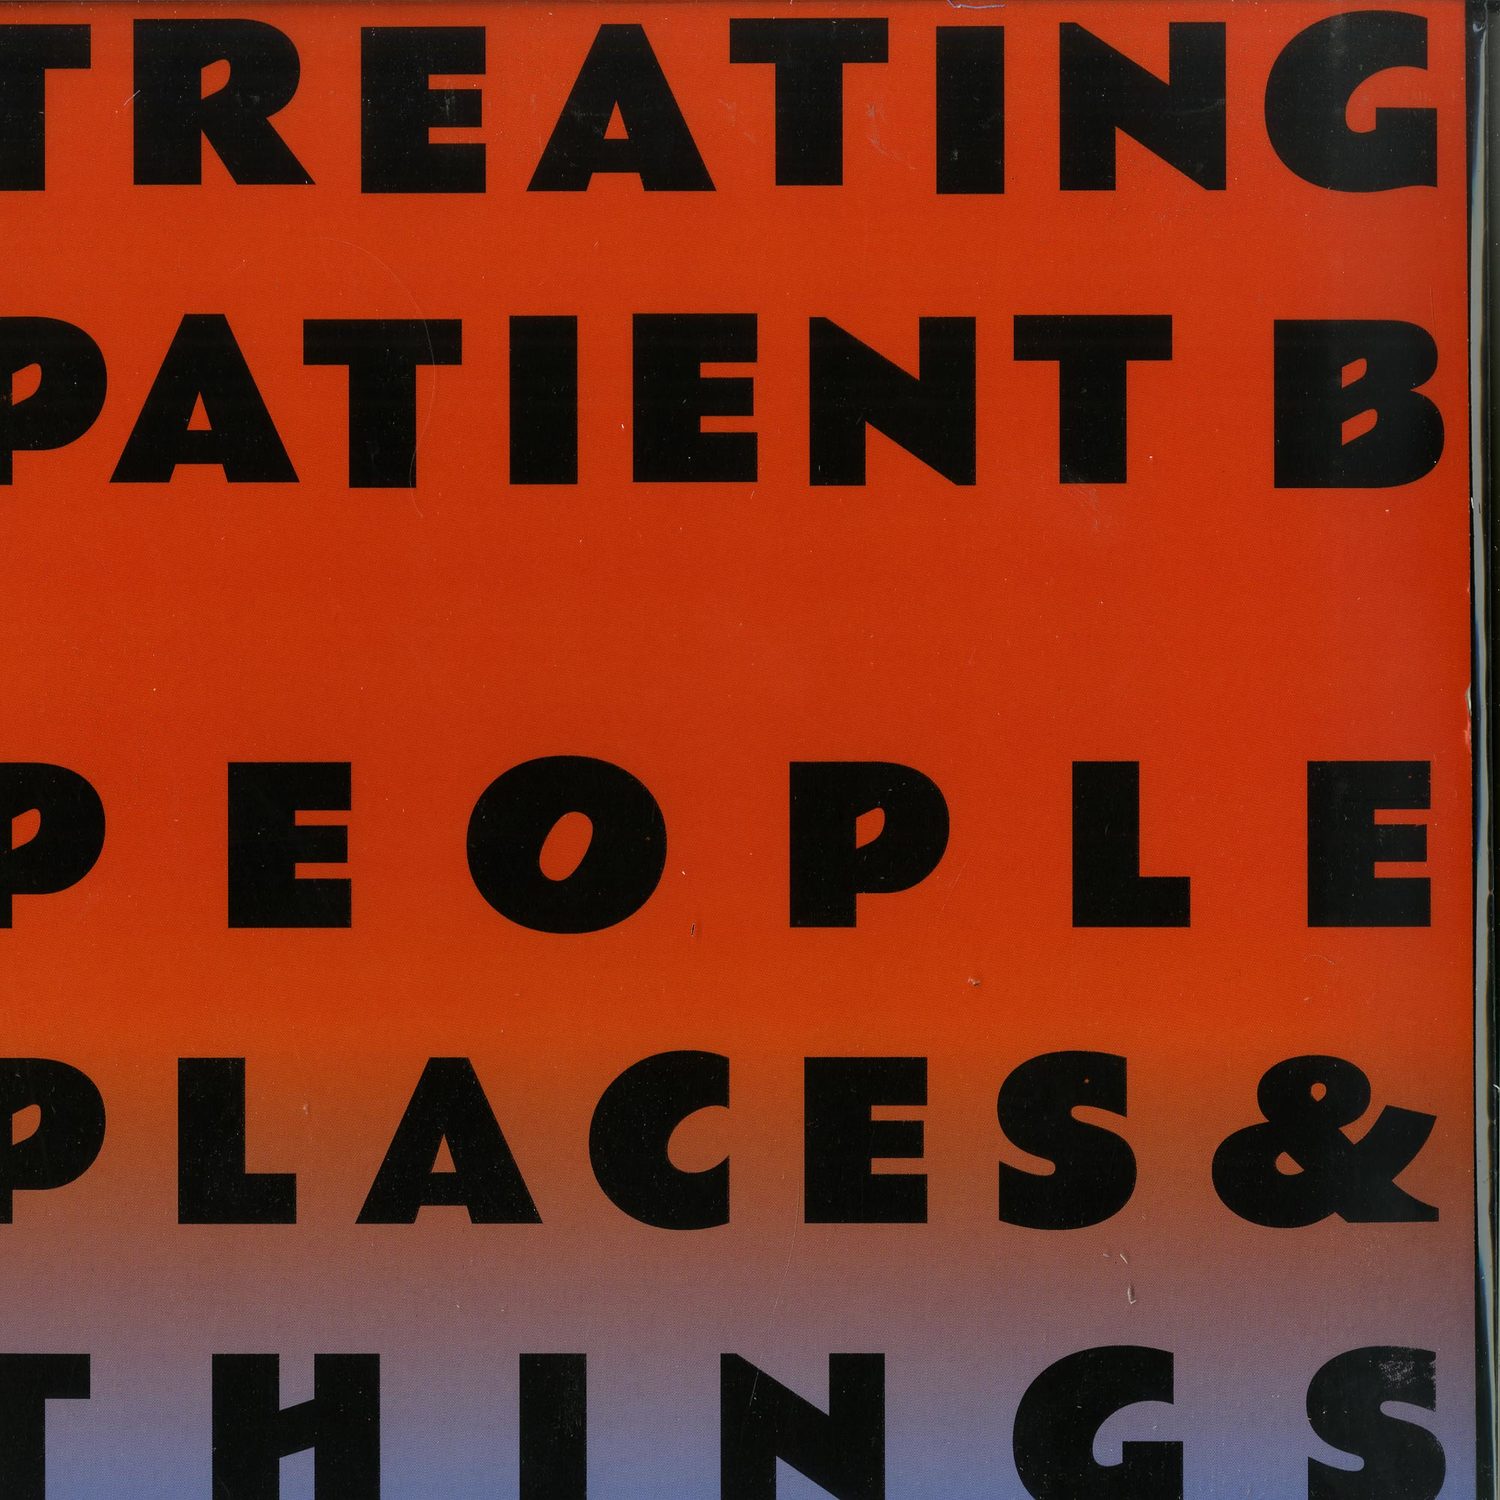 People PLaces & Things - TREATING PATIENT B